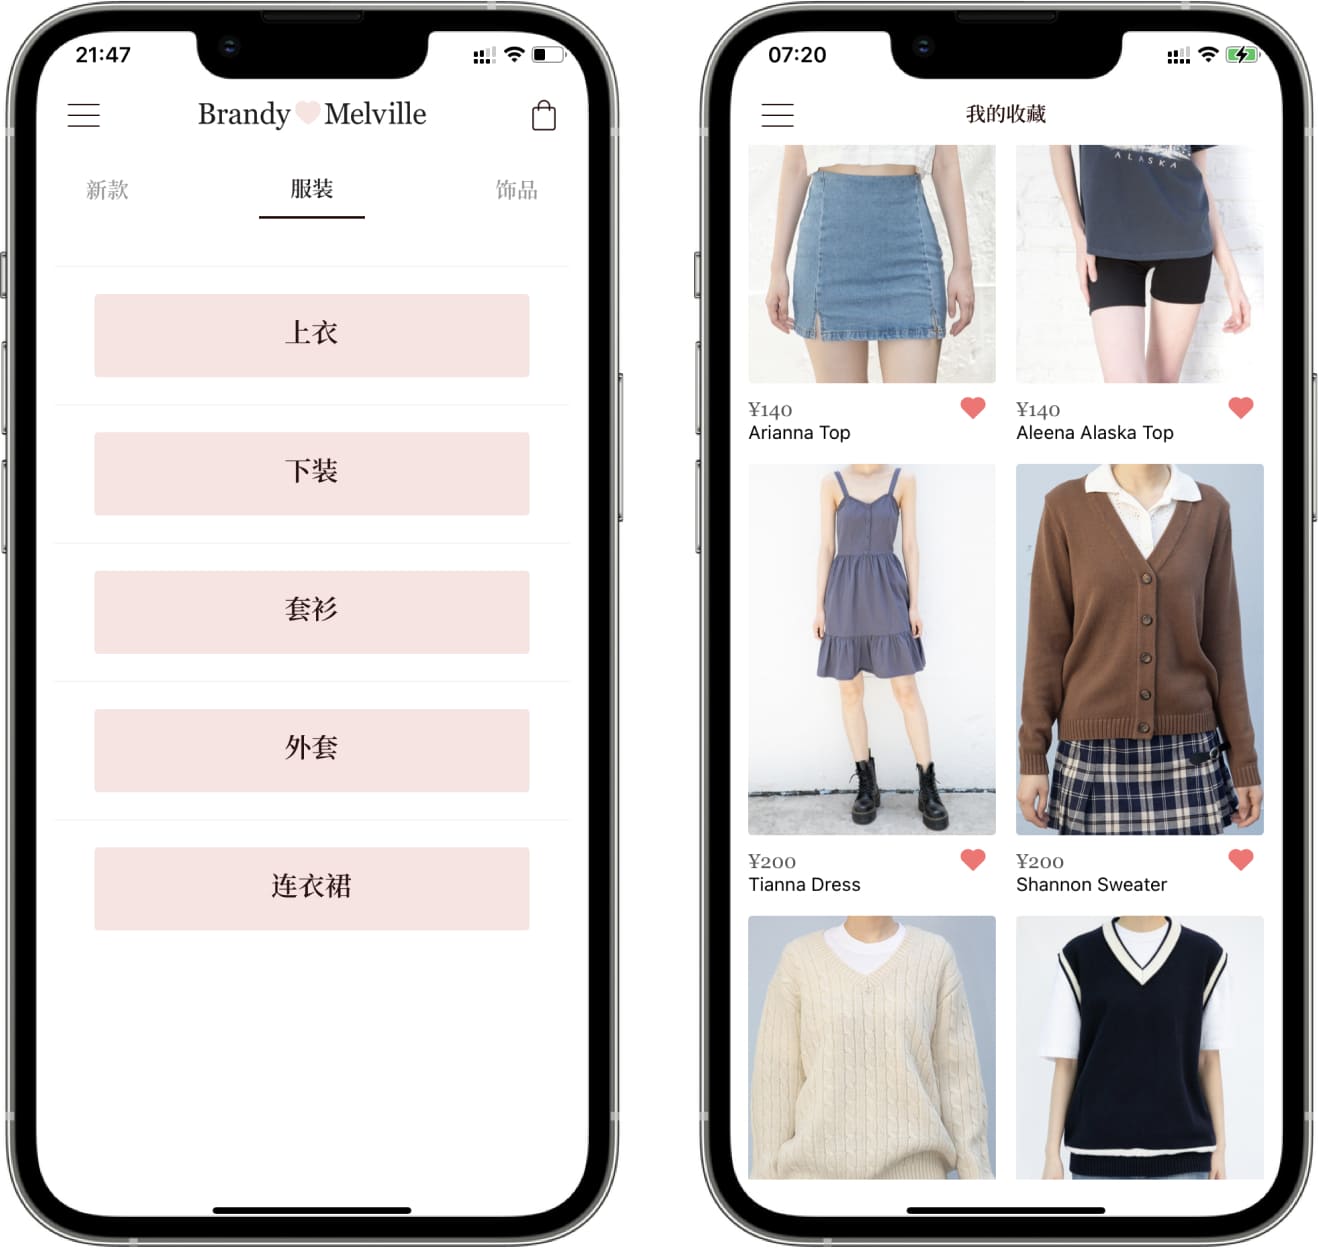 ITC used Magento to help Brandy Melville develop Android and iOs apps